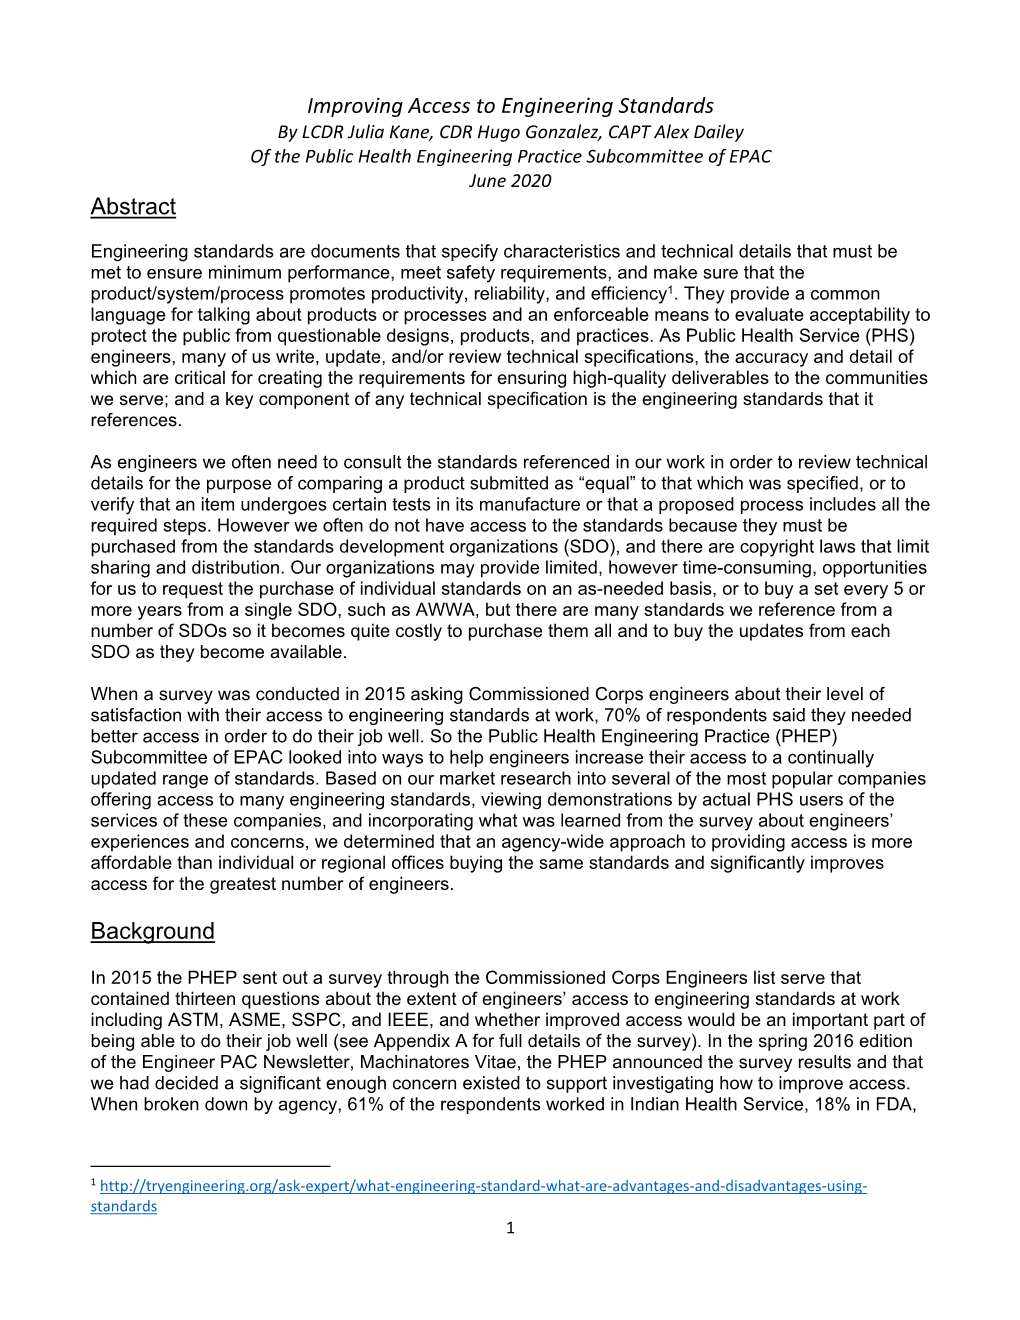 Improving Access to Engineering Standards Abstract Background